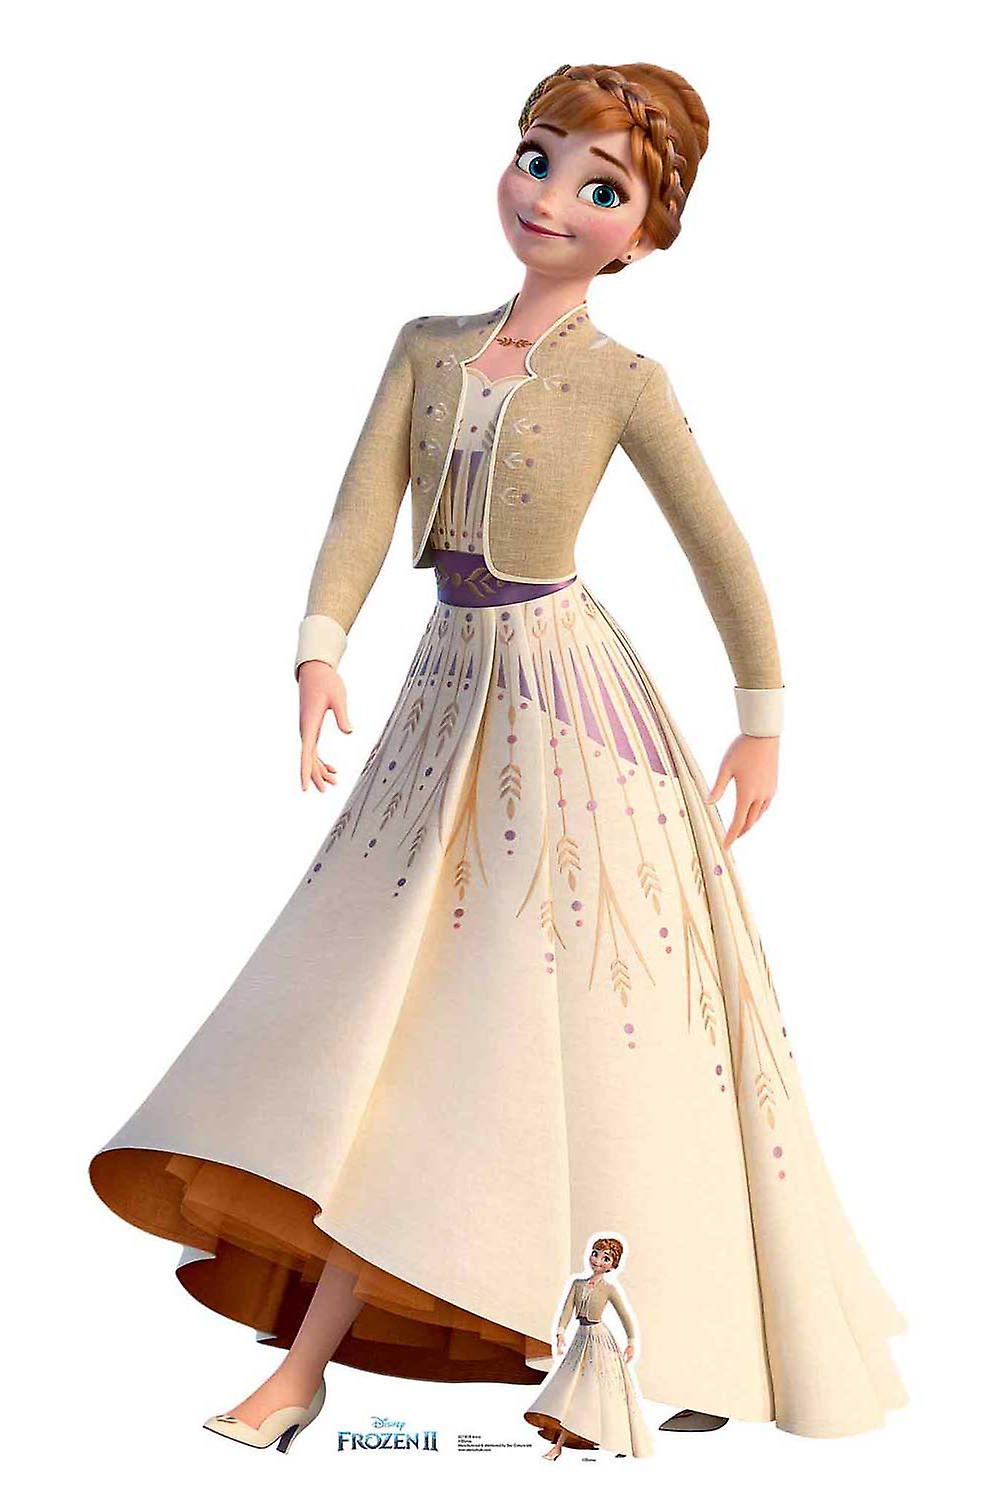 abhinav subramani recommends Images Of Anna From Frozen 2